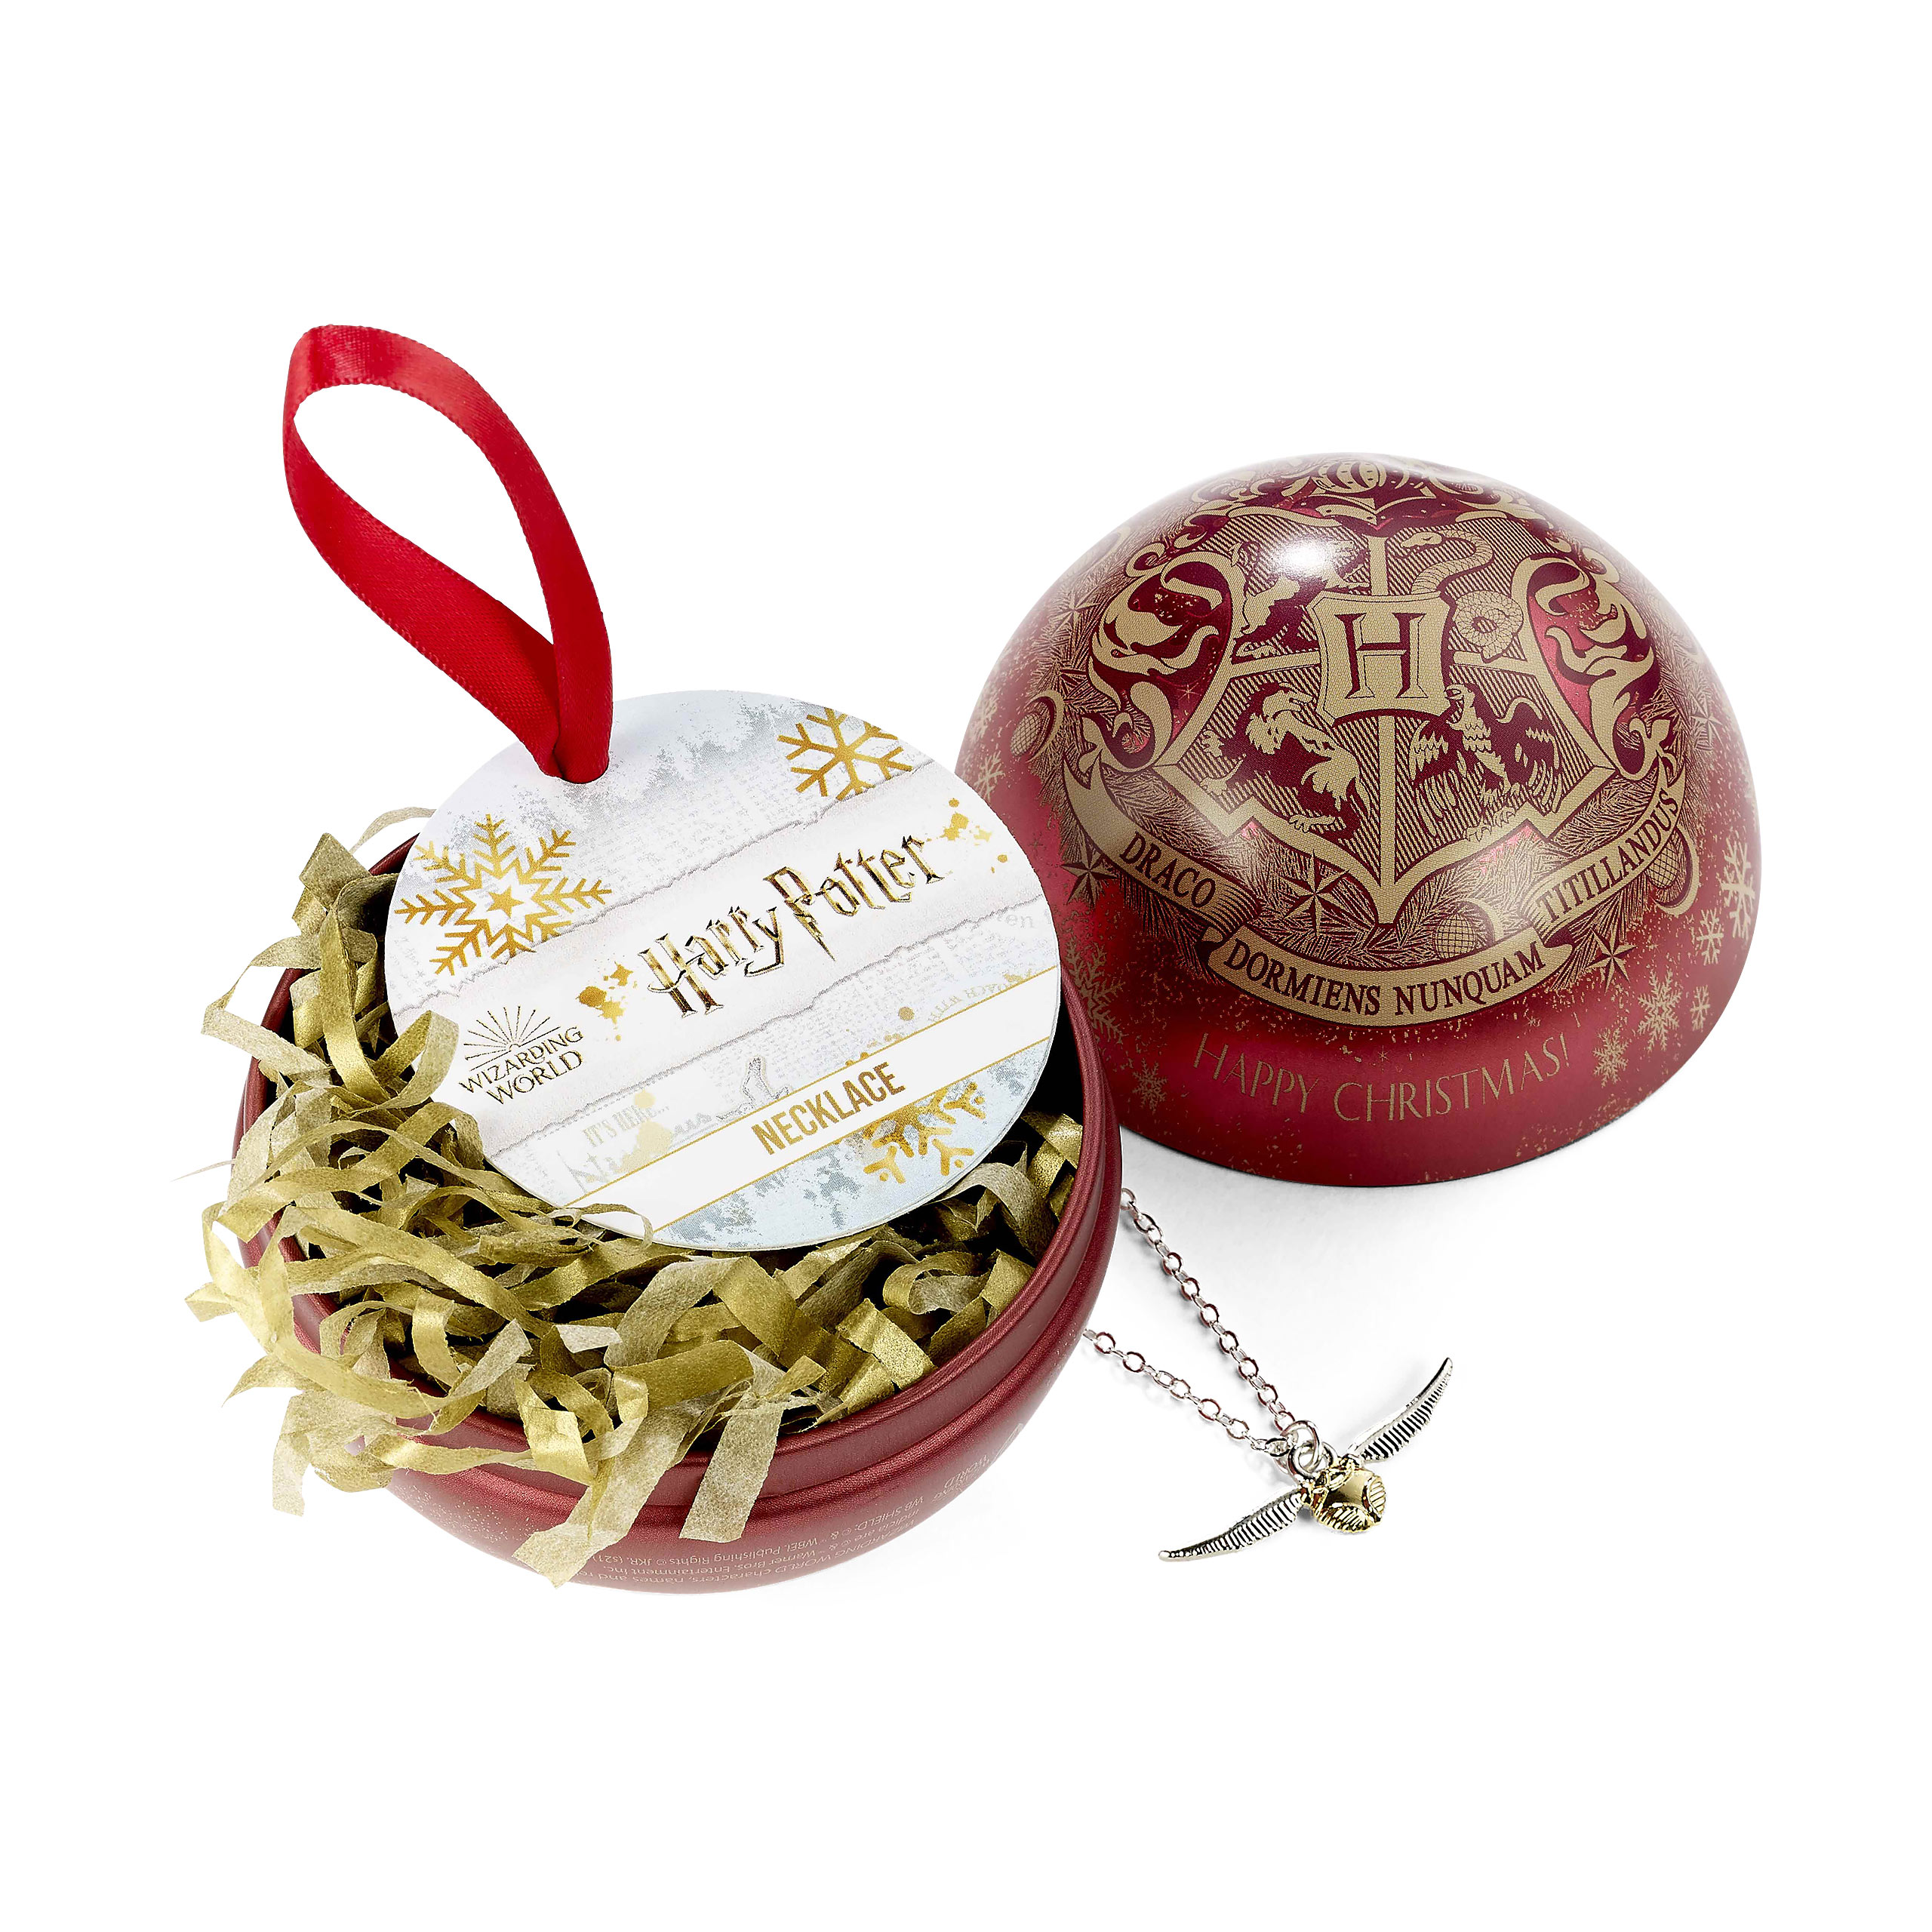 Harry Potter - Hogwarts Crest Christmas Bauble with Snitch Necklace